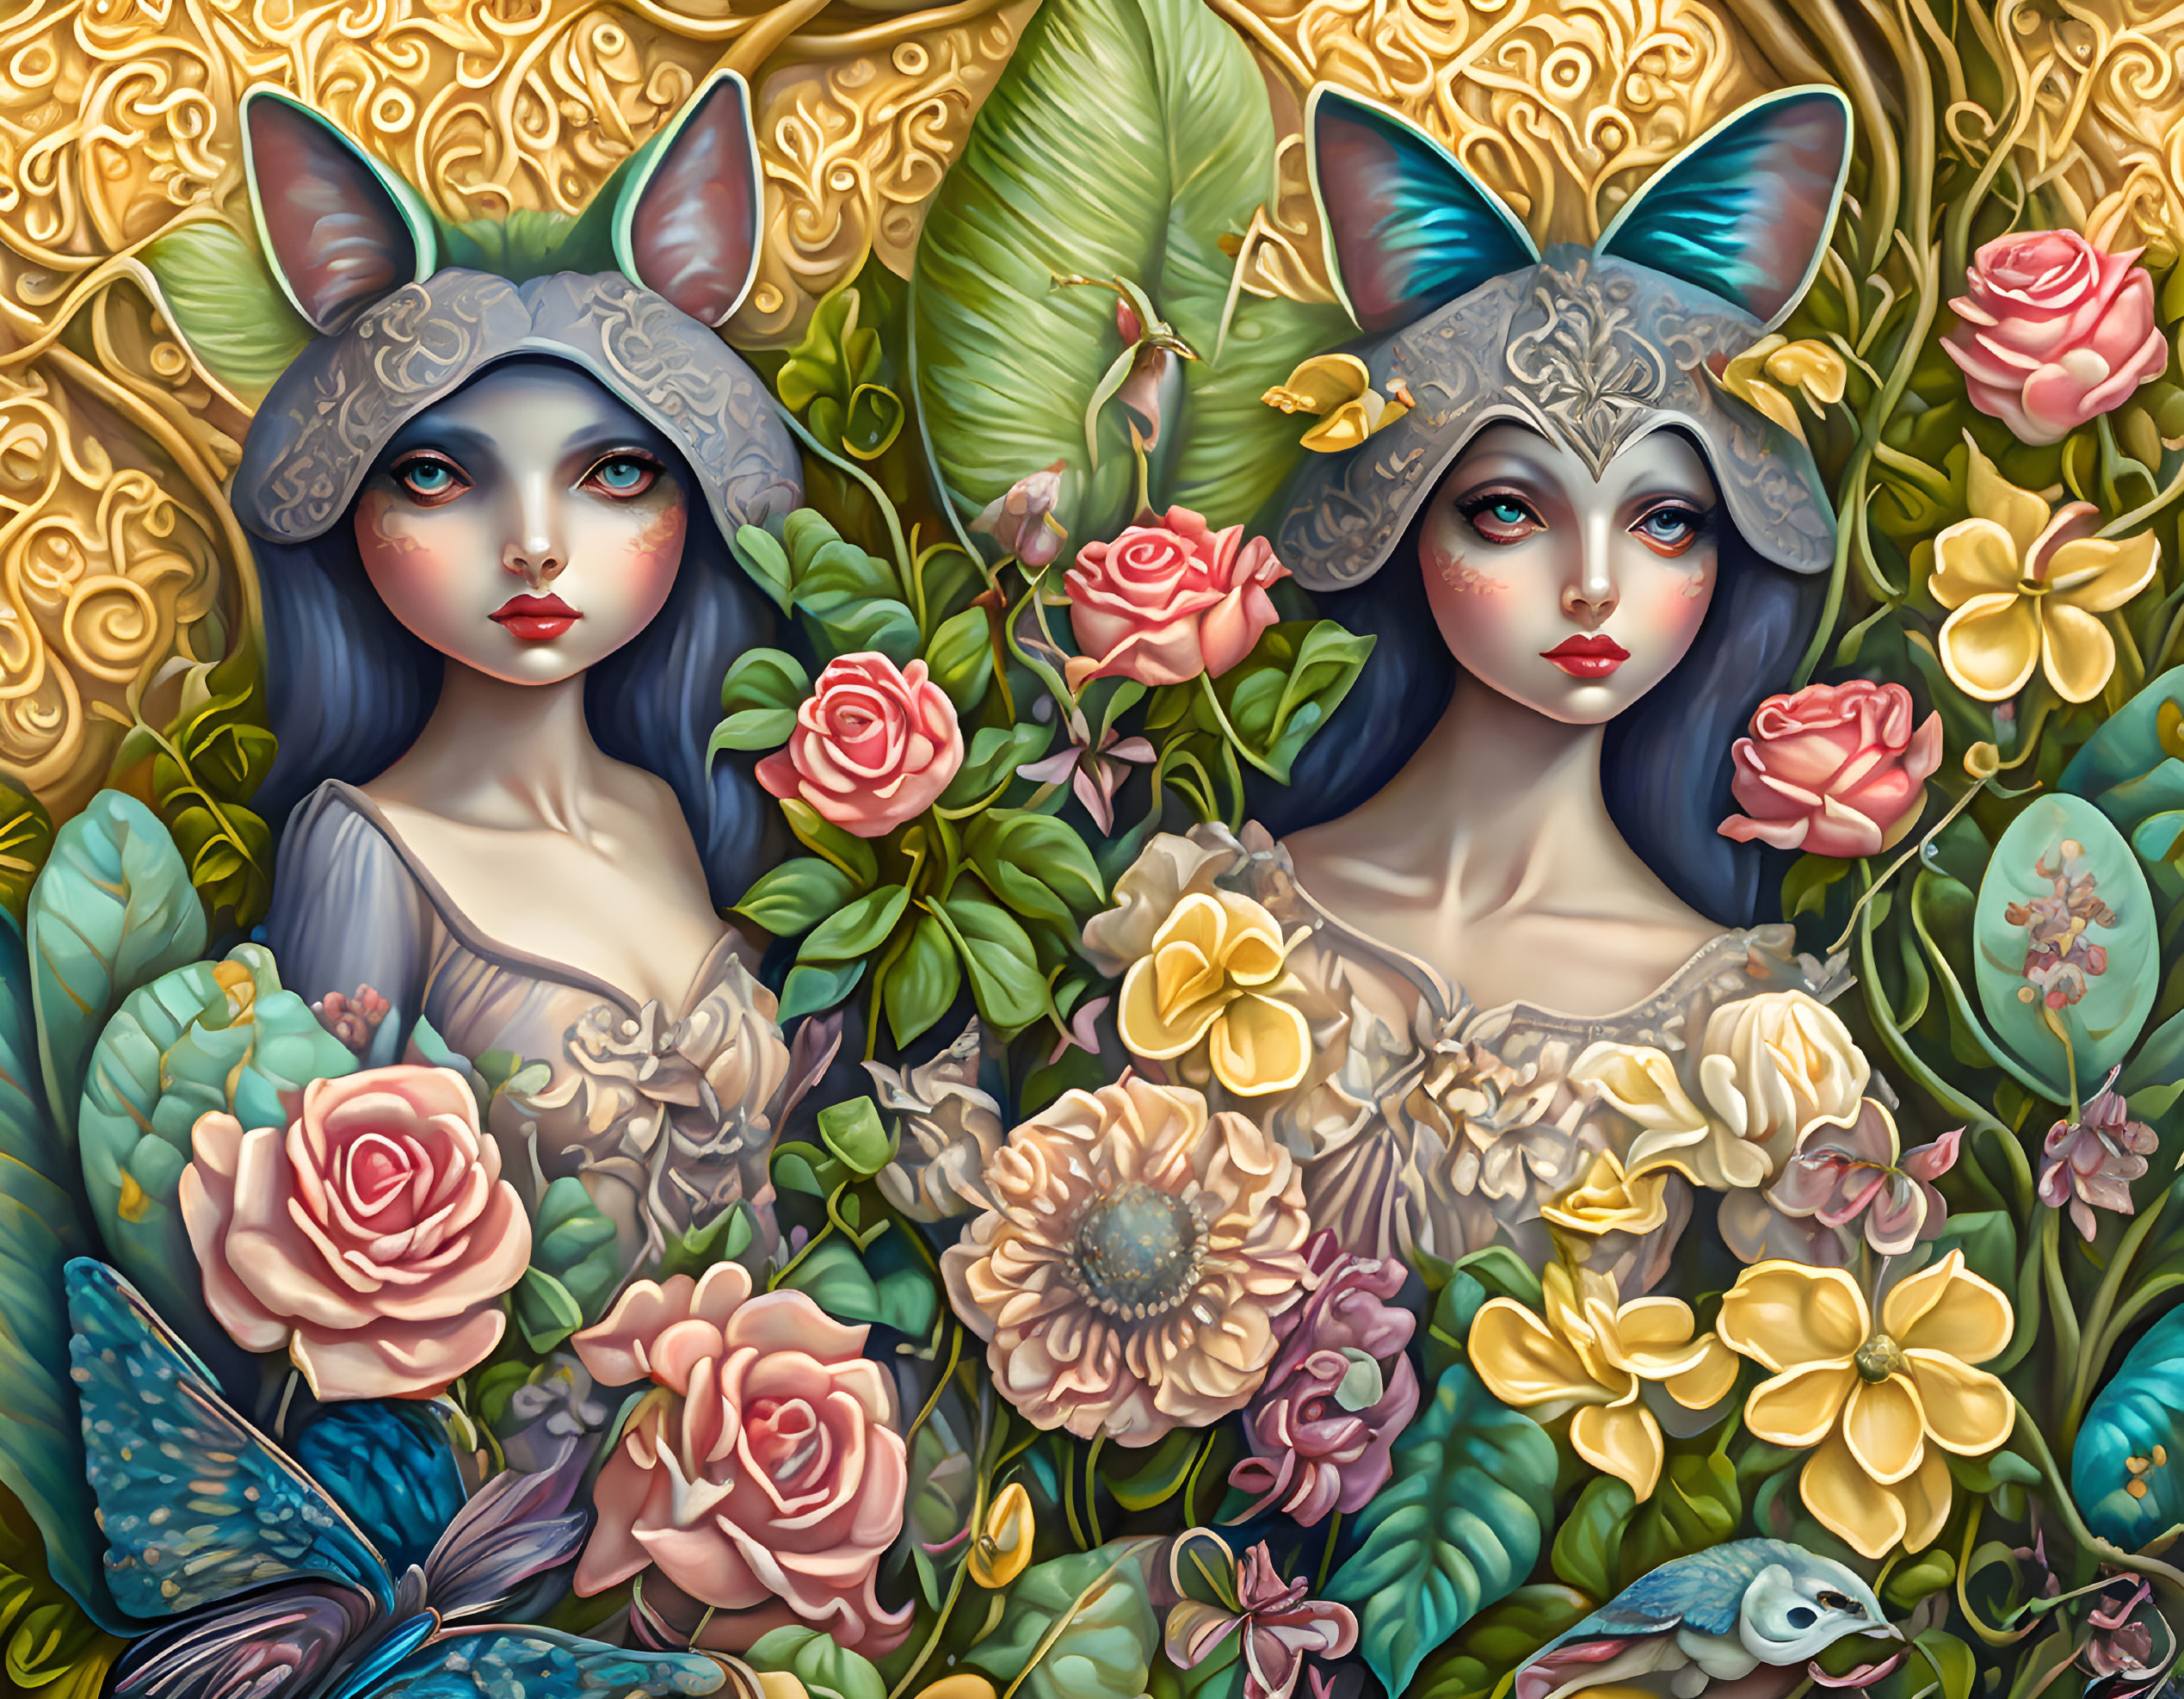 Artistic portrayal of two female figures with feline ears among vibrant floral bouquet